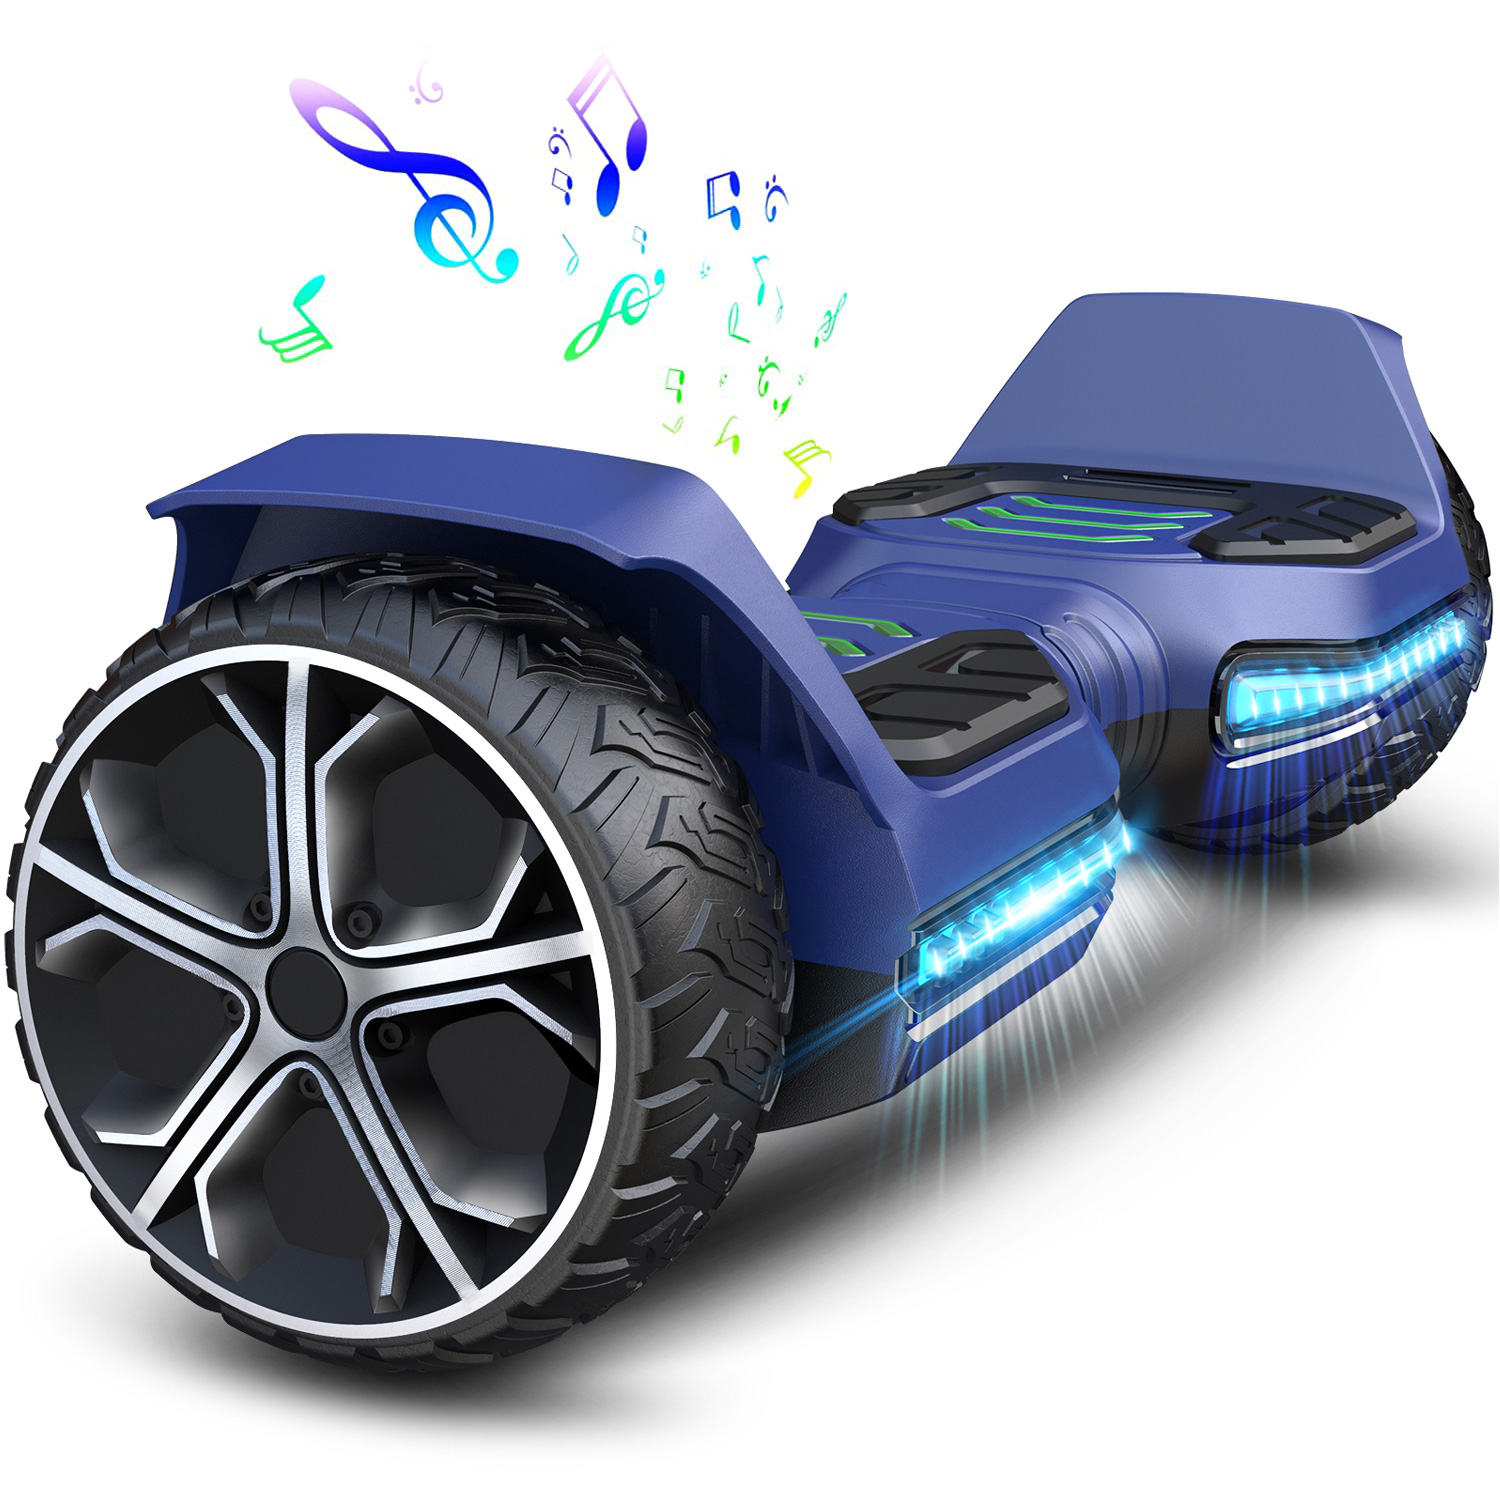 Flash Wheel Hoverboard with Bluetooth Speaker, Self Balancing Scooter for Kids & Adults, UL2272 Certified - image 1 of 12